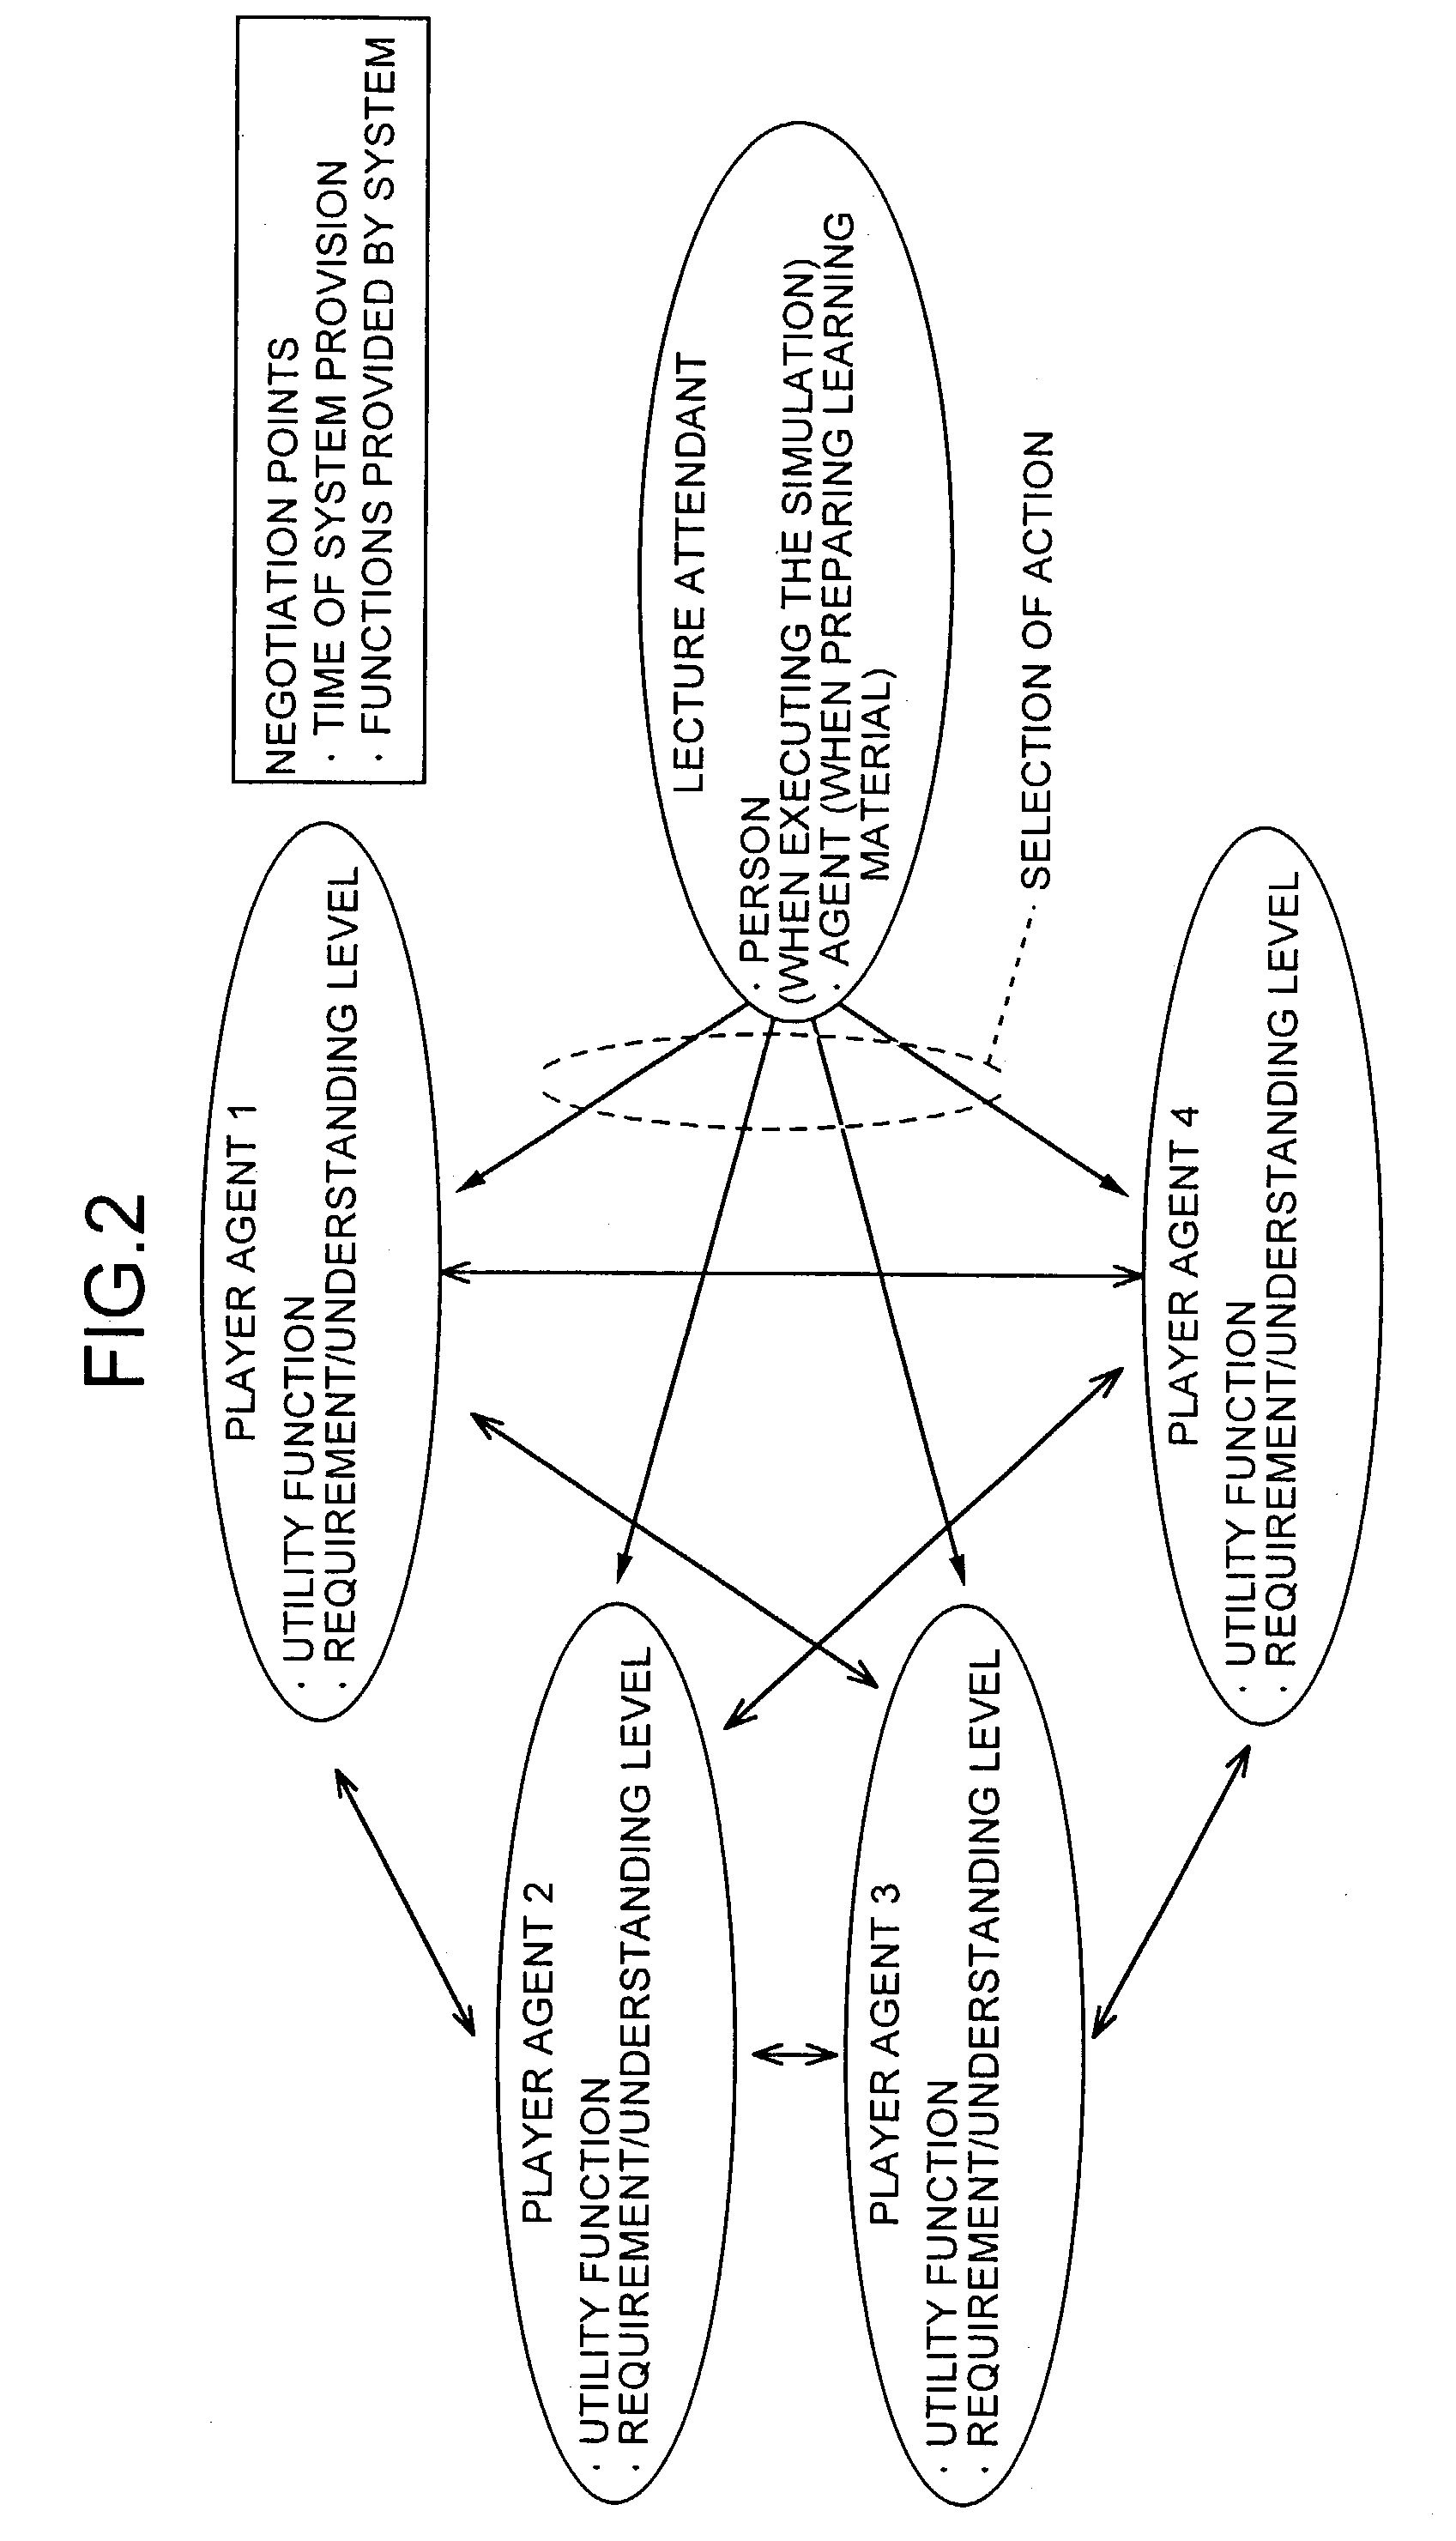 Role-playing simulation apparatus and method, and computer product